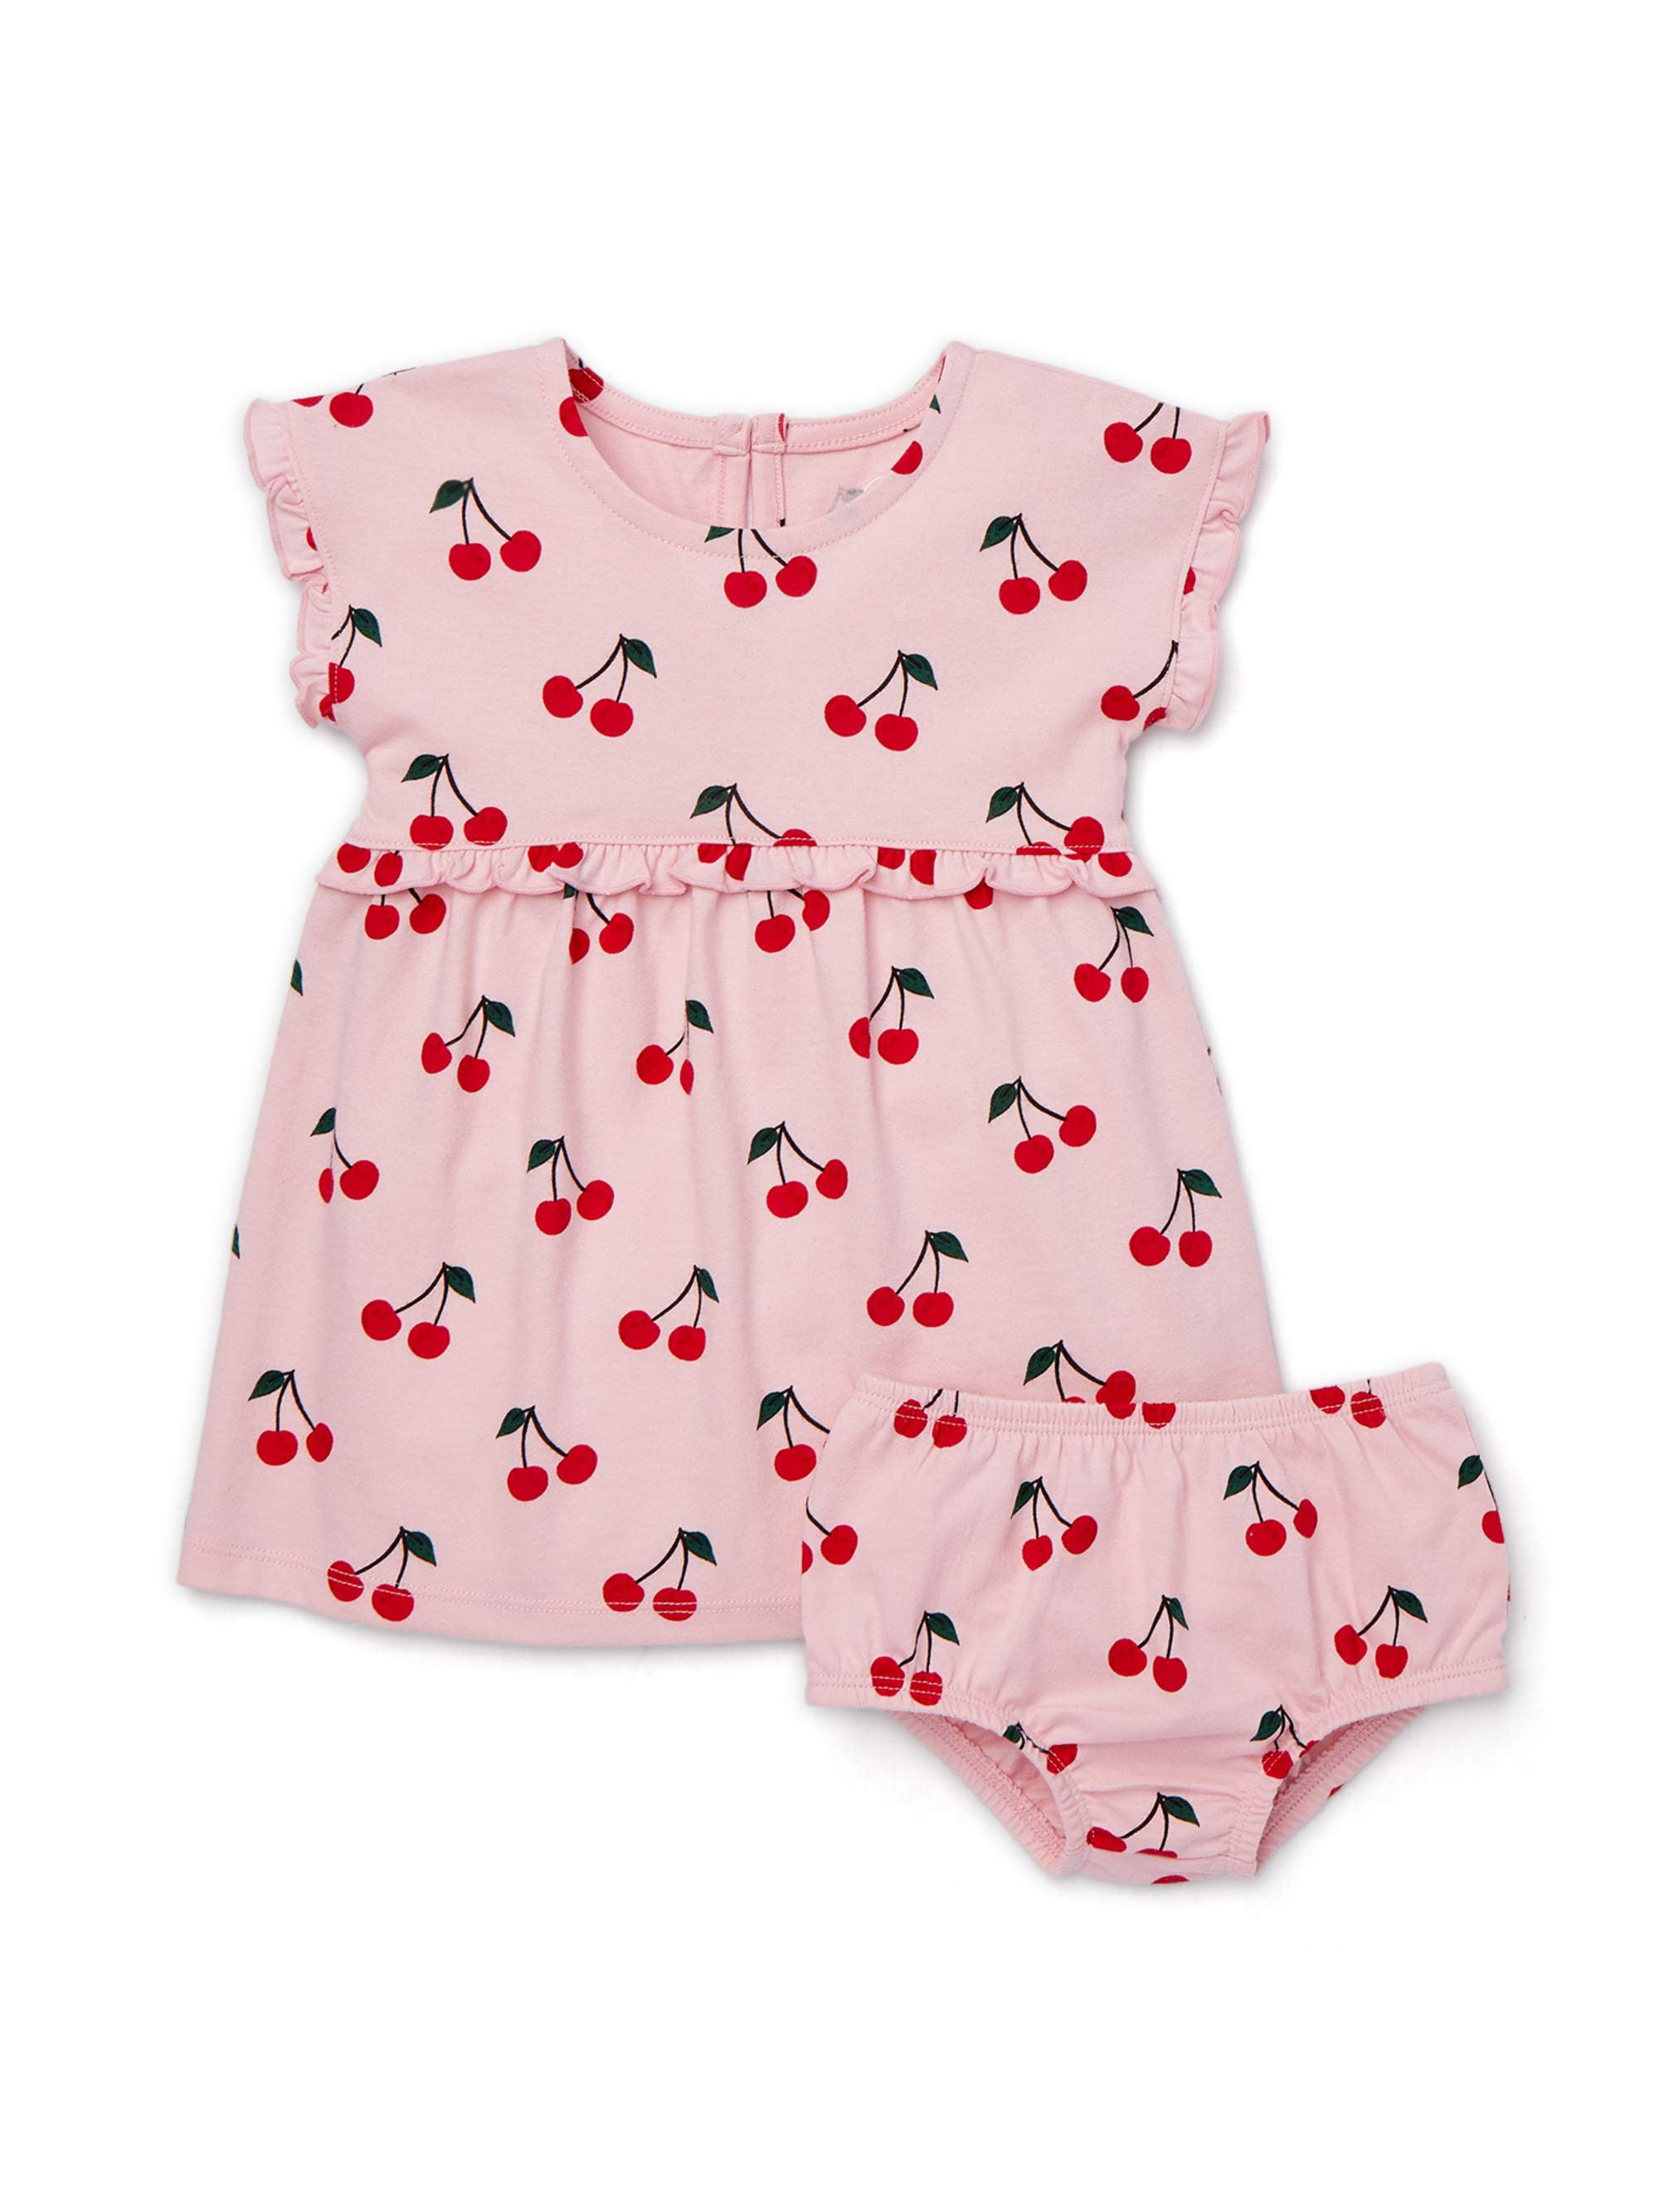 Shop Carhartt Unisex Baby Girl Dresses & Rompers by Cherie-Cherry